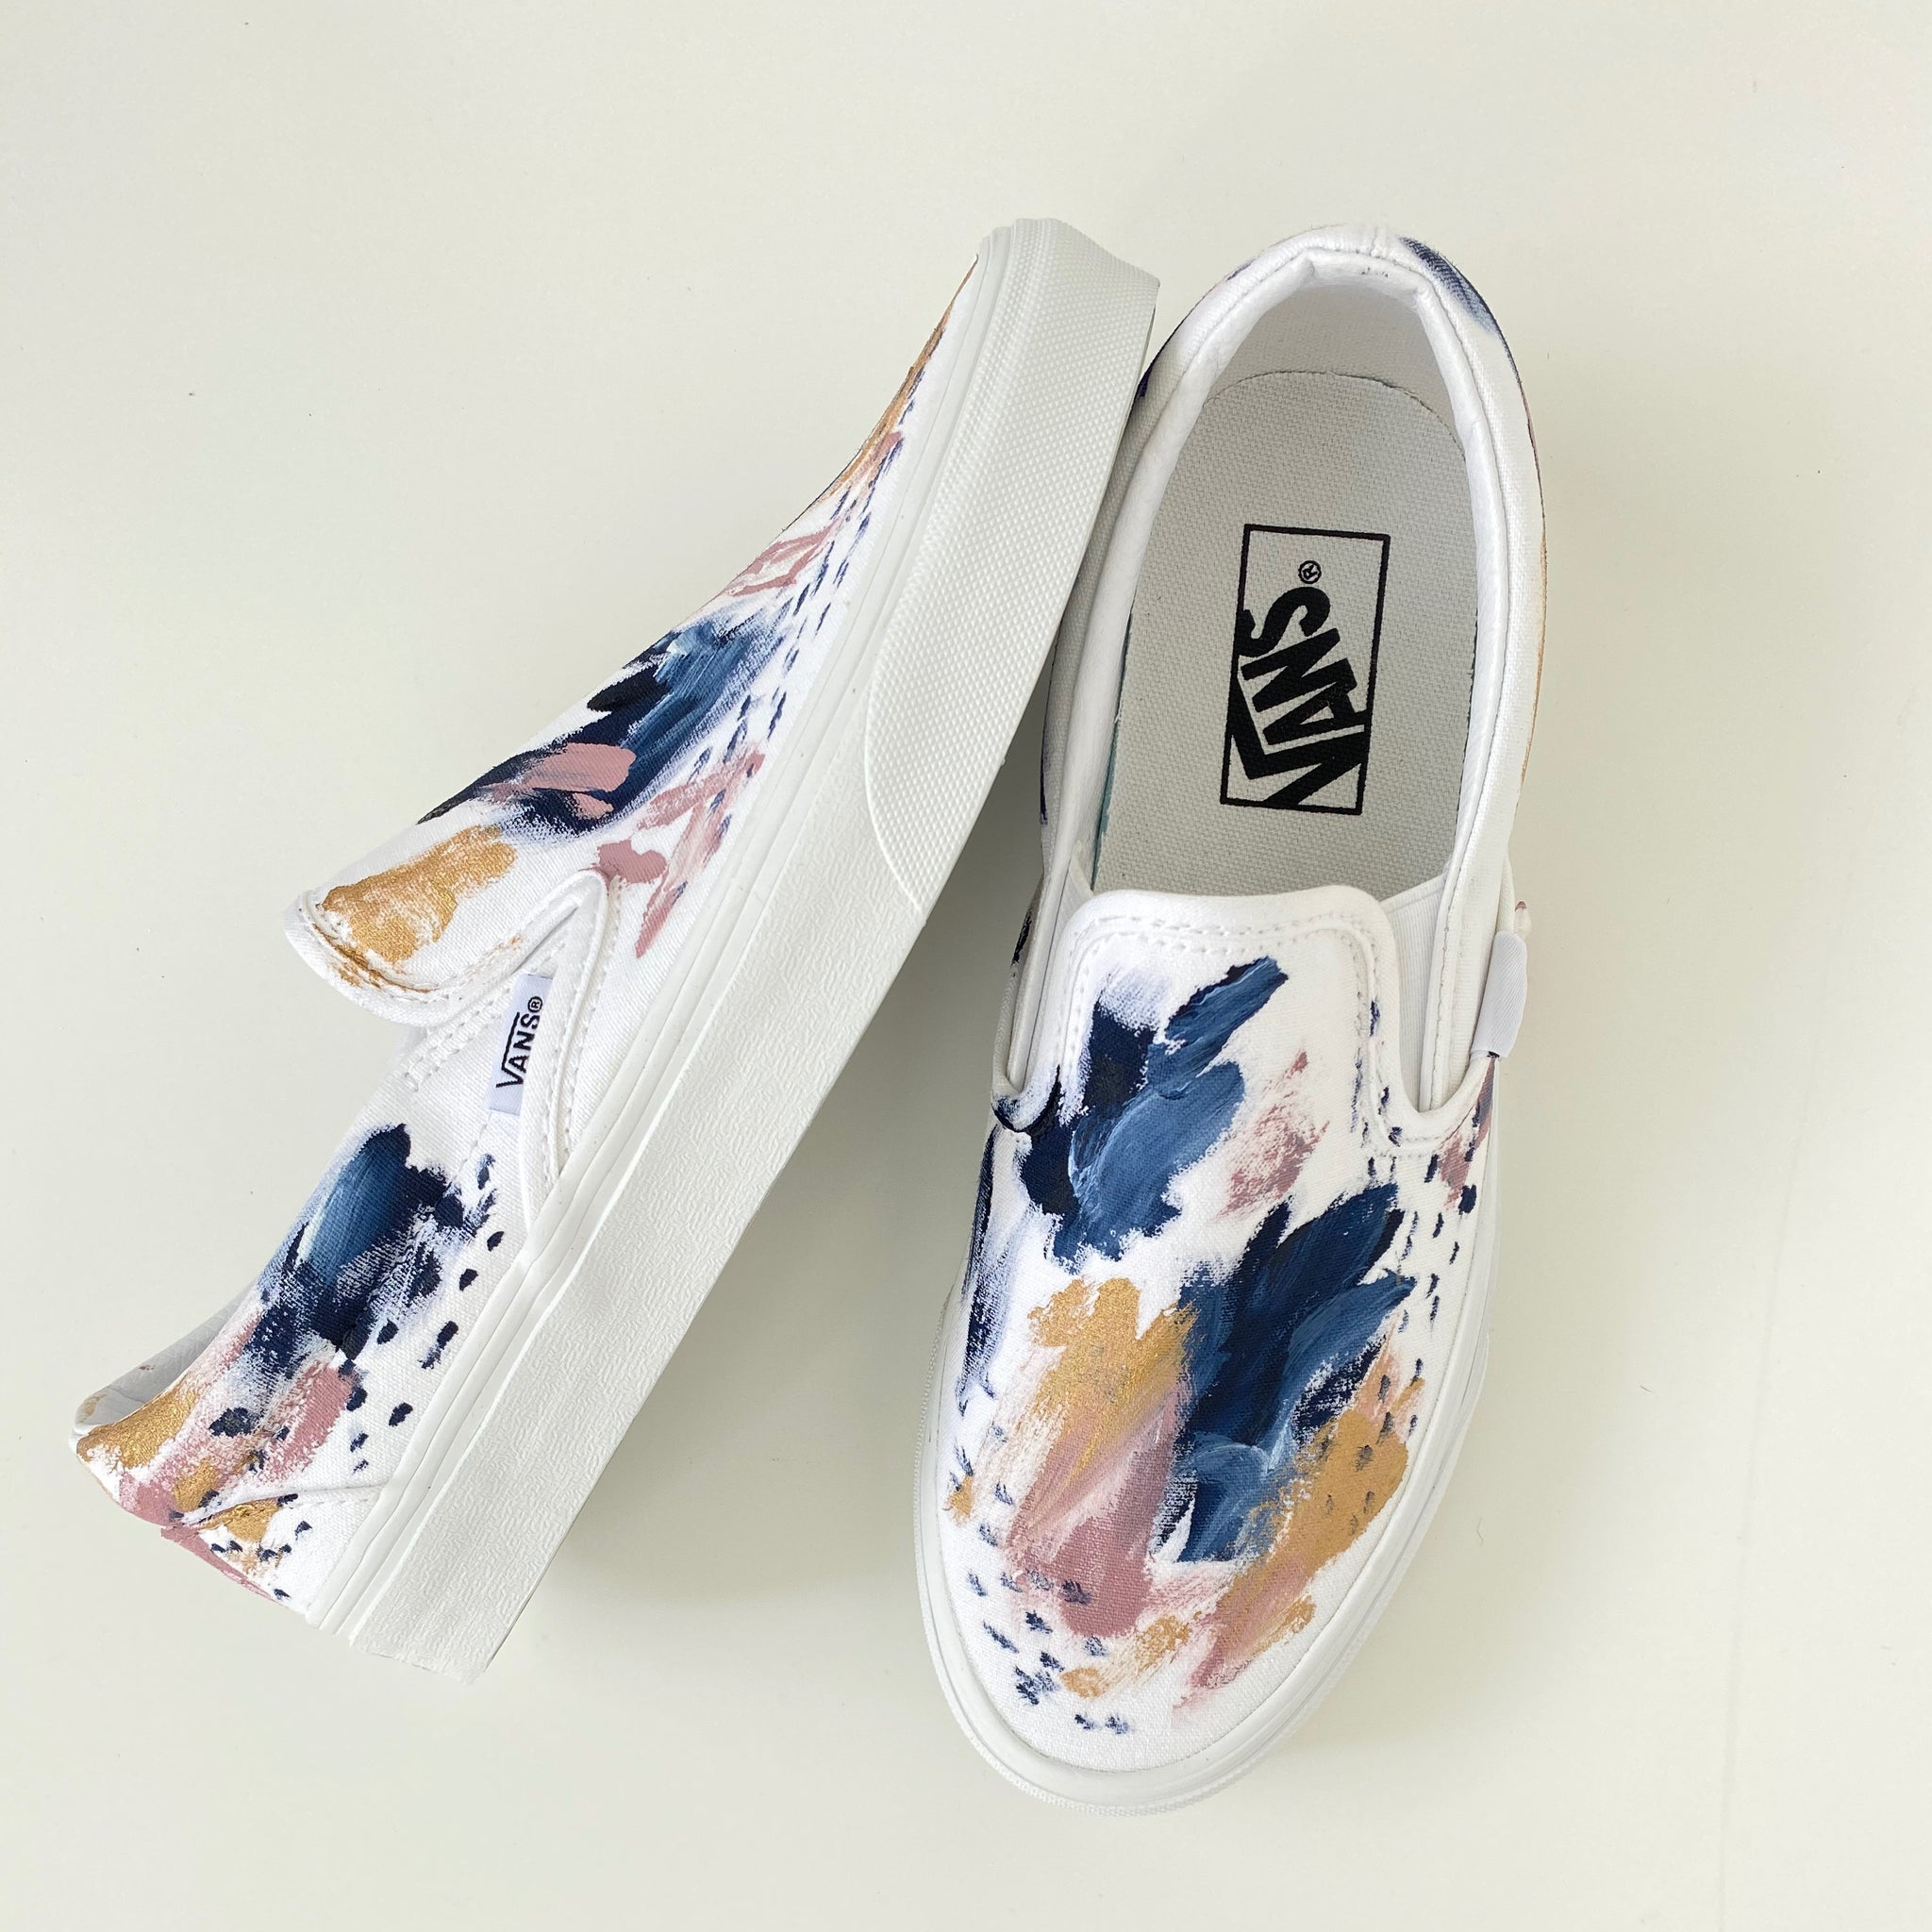 Thought I'd share my new custom Vans slip ons that my friend